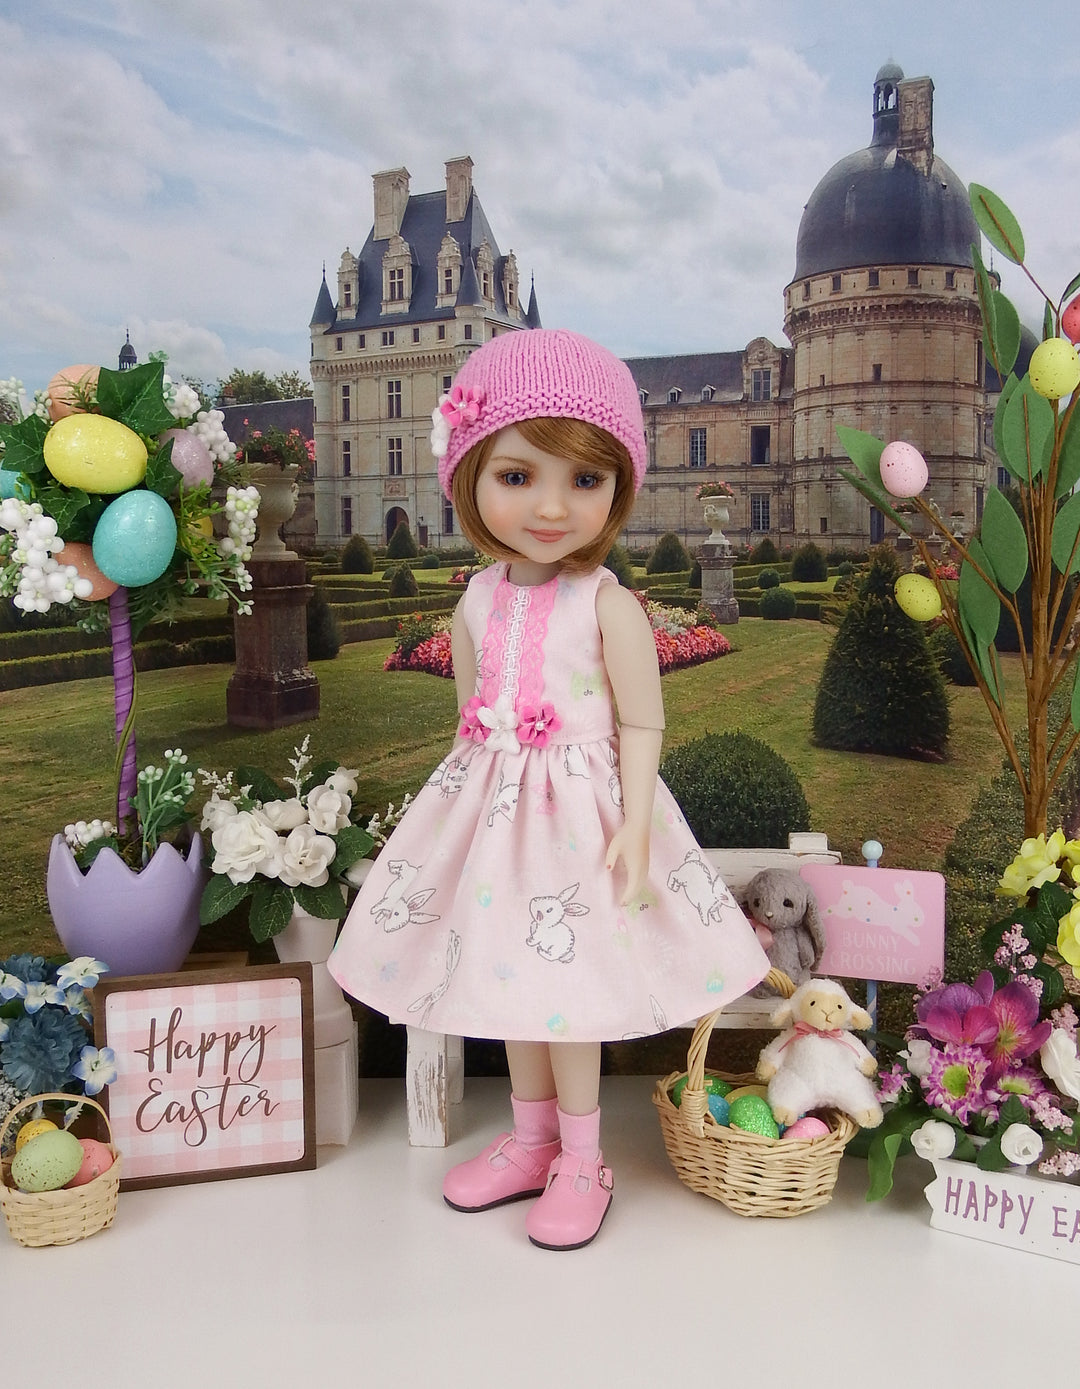 Precious Bunny - dress and hat with shoes for Ruby Red Fashion Friends doll